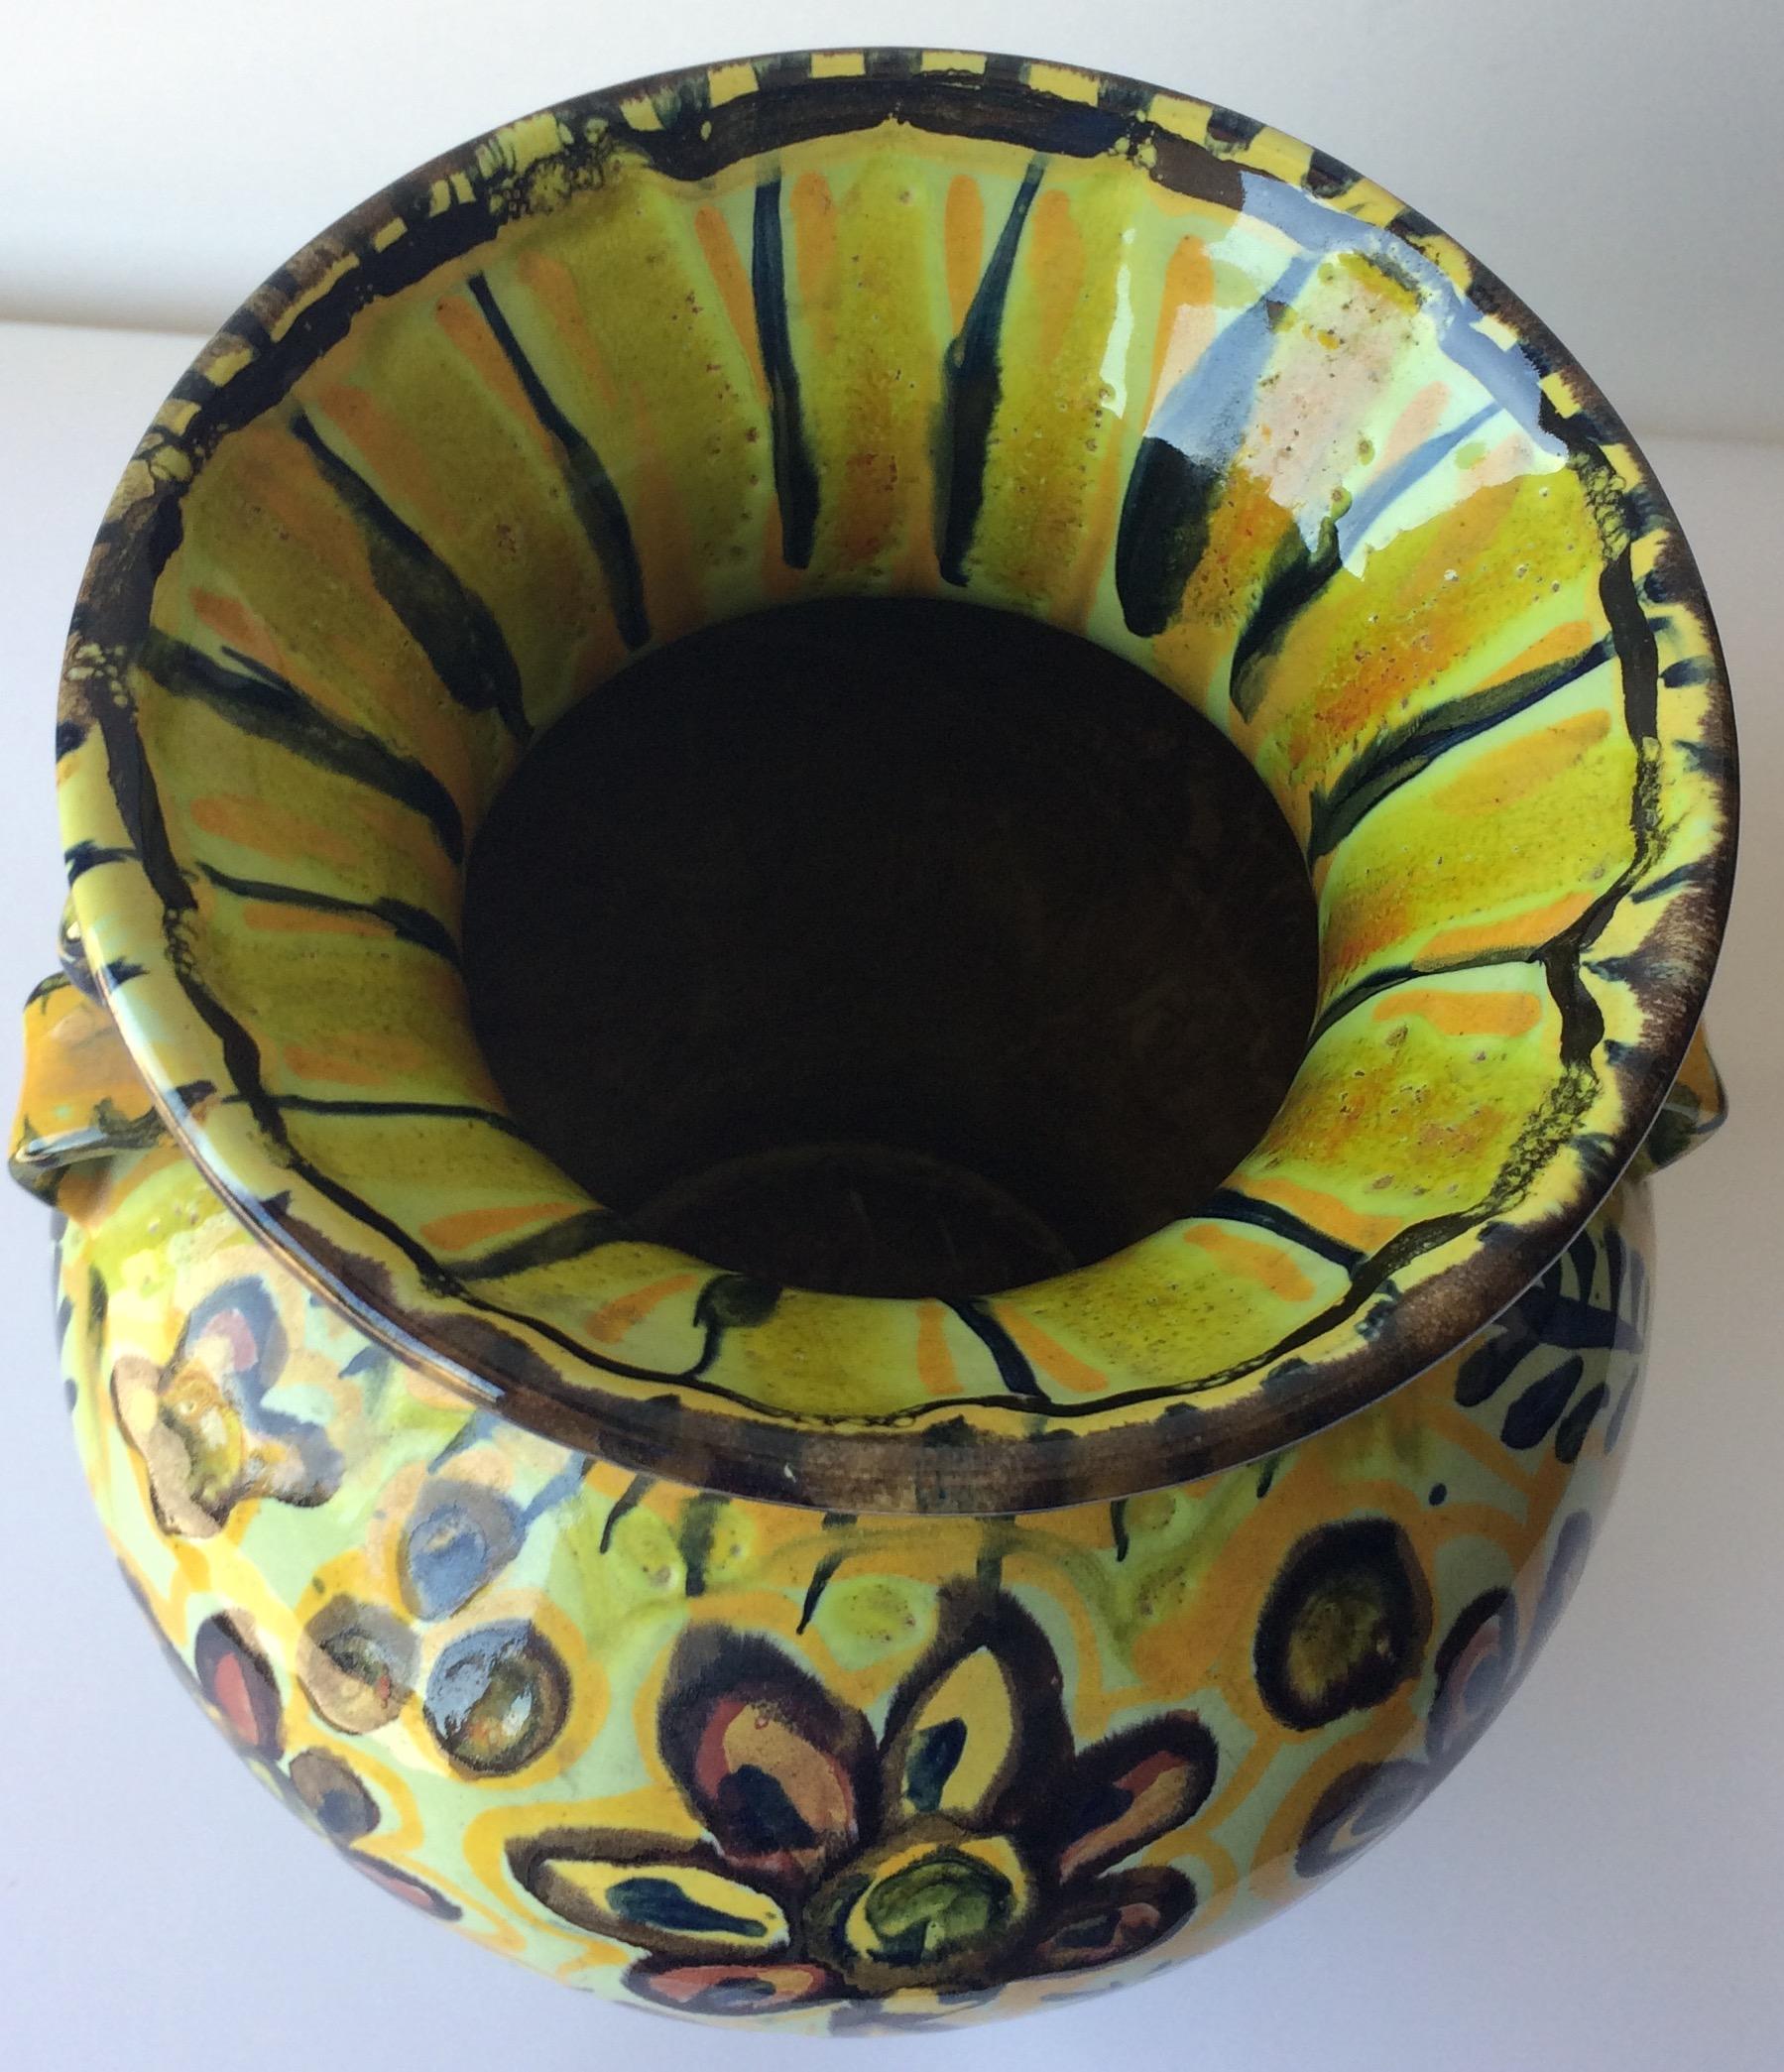 Dazzling glazed ceramic vase, the primary pale yellow and the floral designs are truly eye catching. Made in Quimper, France by Keraluc Pottery Studio. 

It can enhance any shelf, table, credenza or countertop as it is truly an interesting